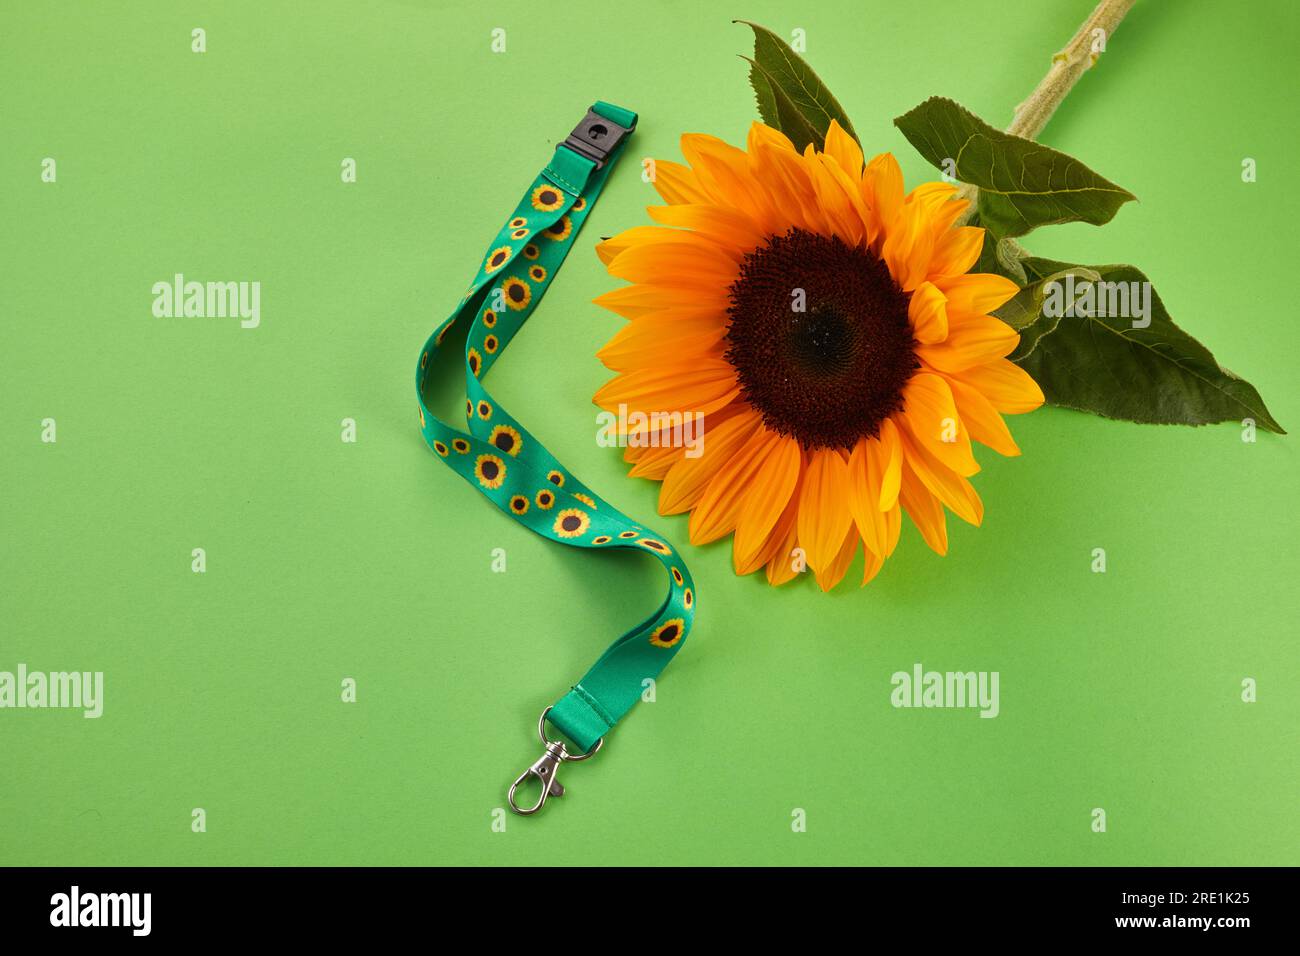 Sunflower lanyard, symbol of people with invisible or hidden disabilities. Stock Photo